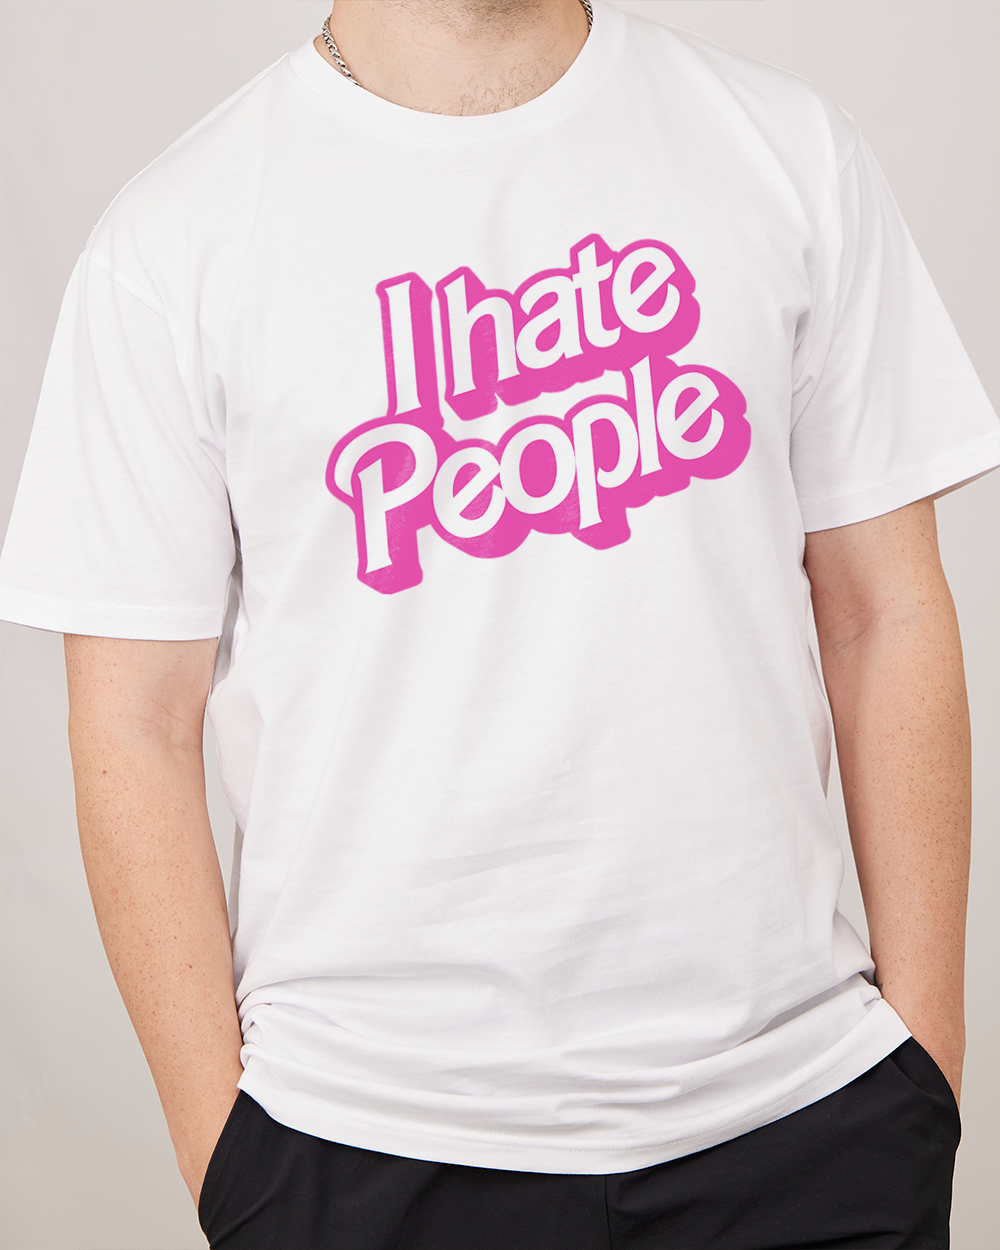 I Hate People T-Shirt White